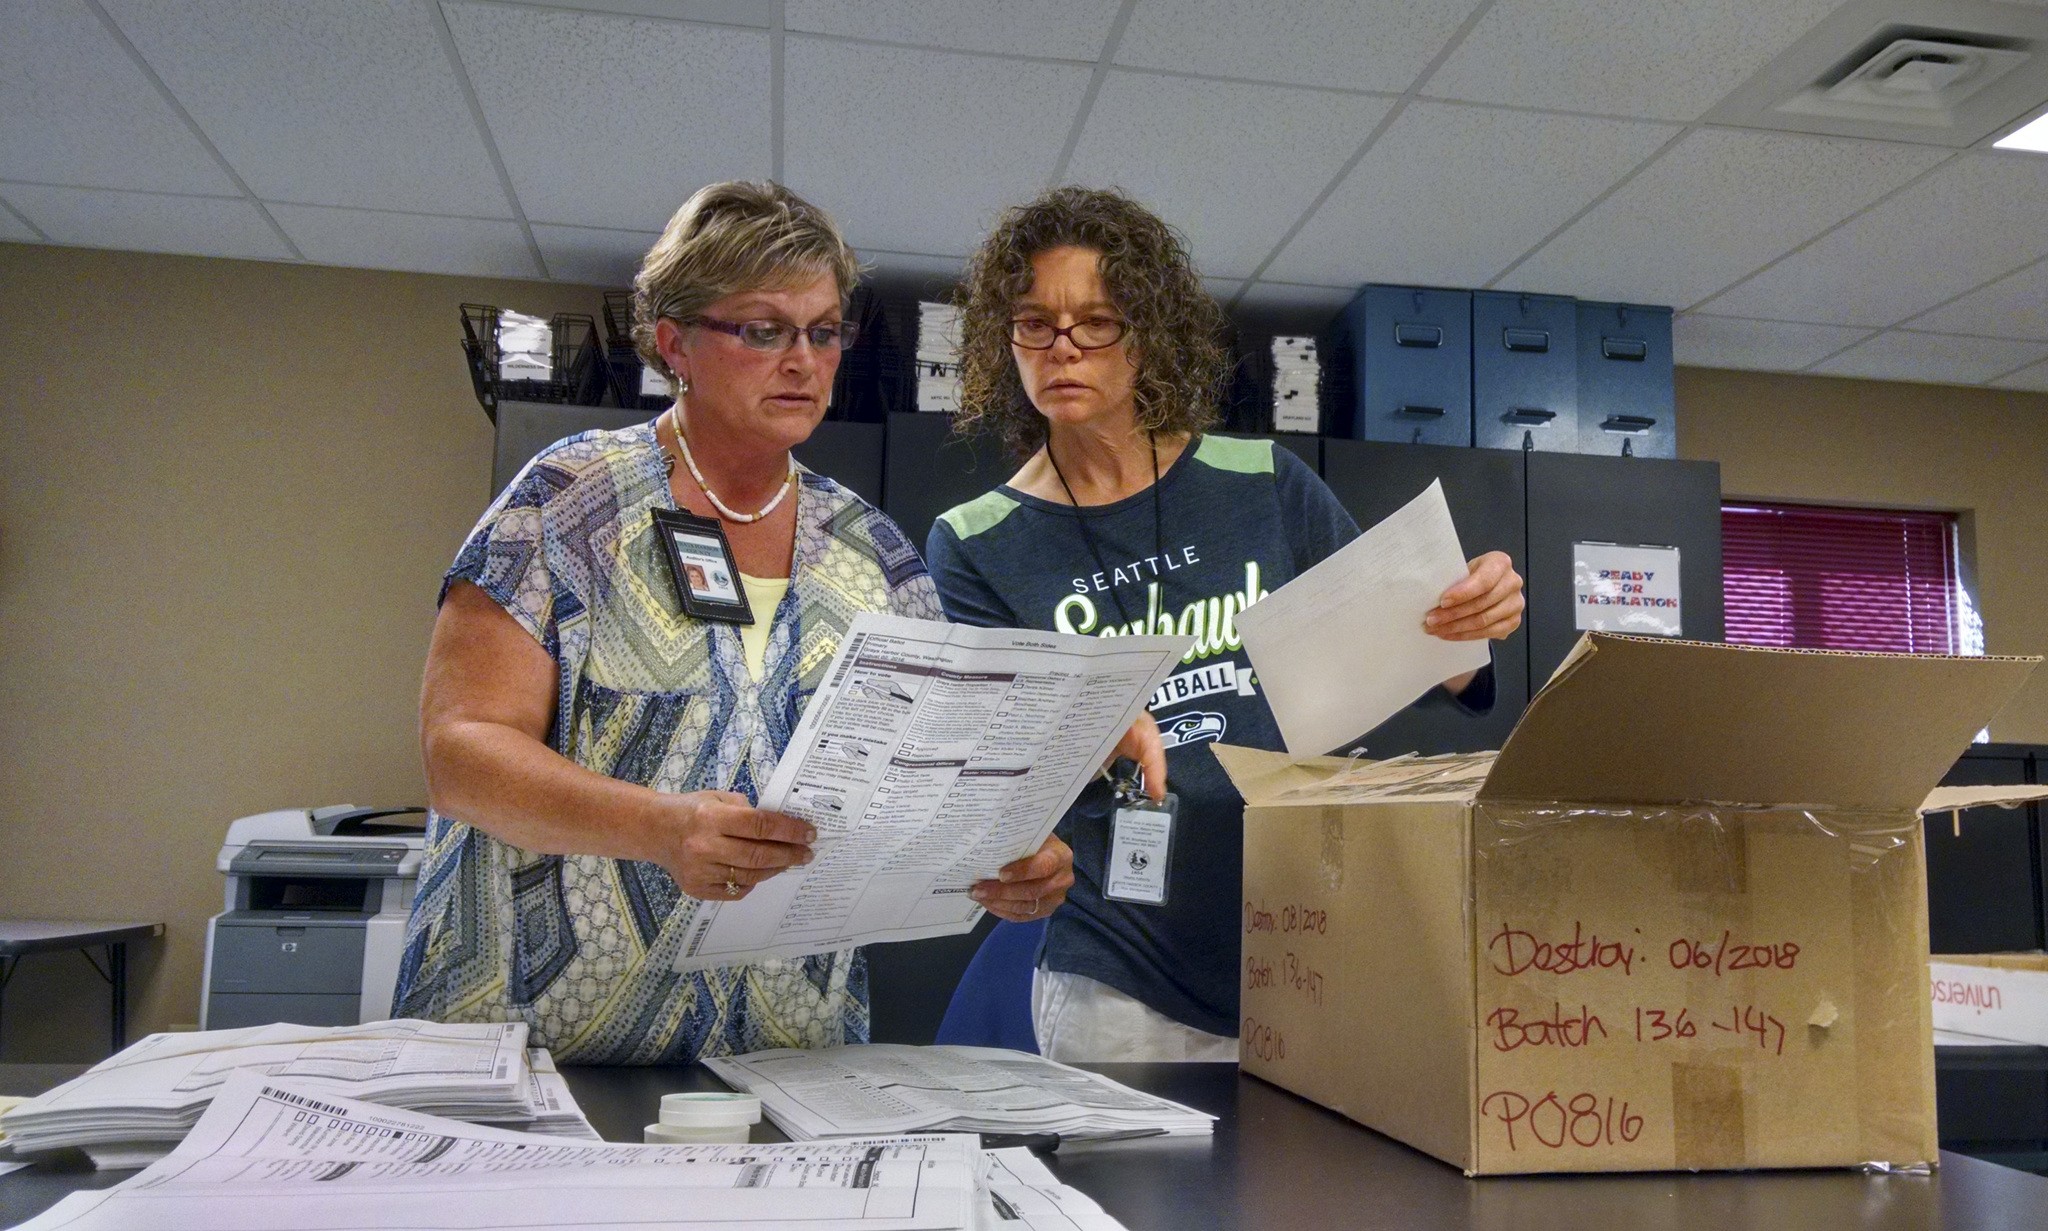 Purcell wins District 19 recount, to face Walsh in November